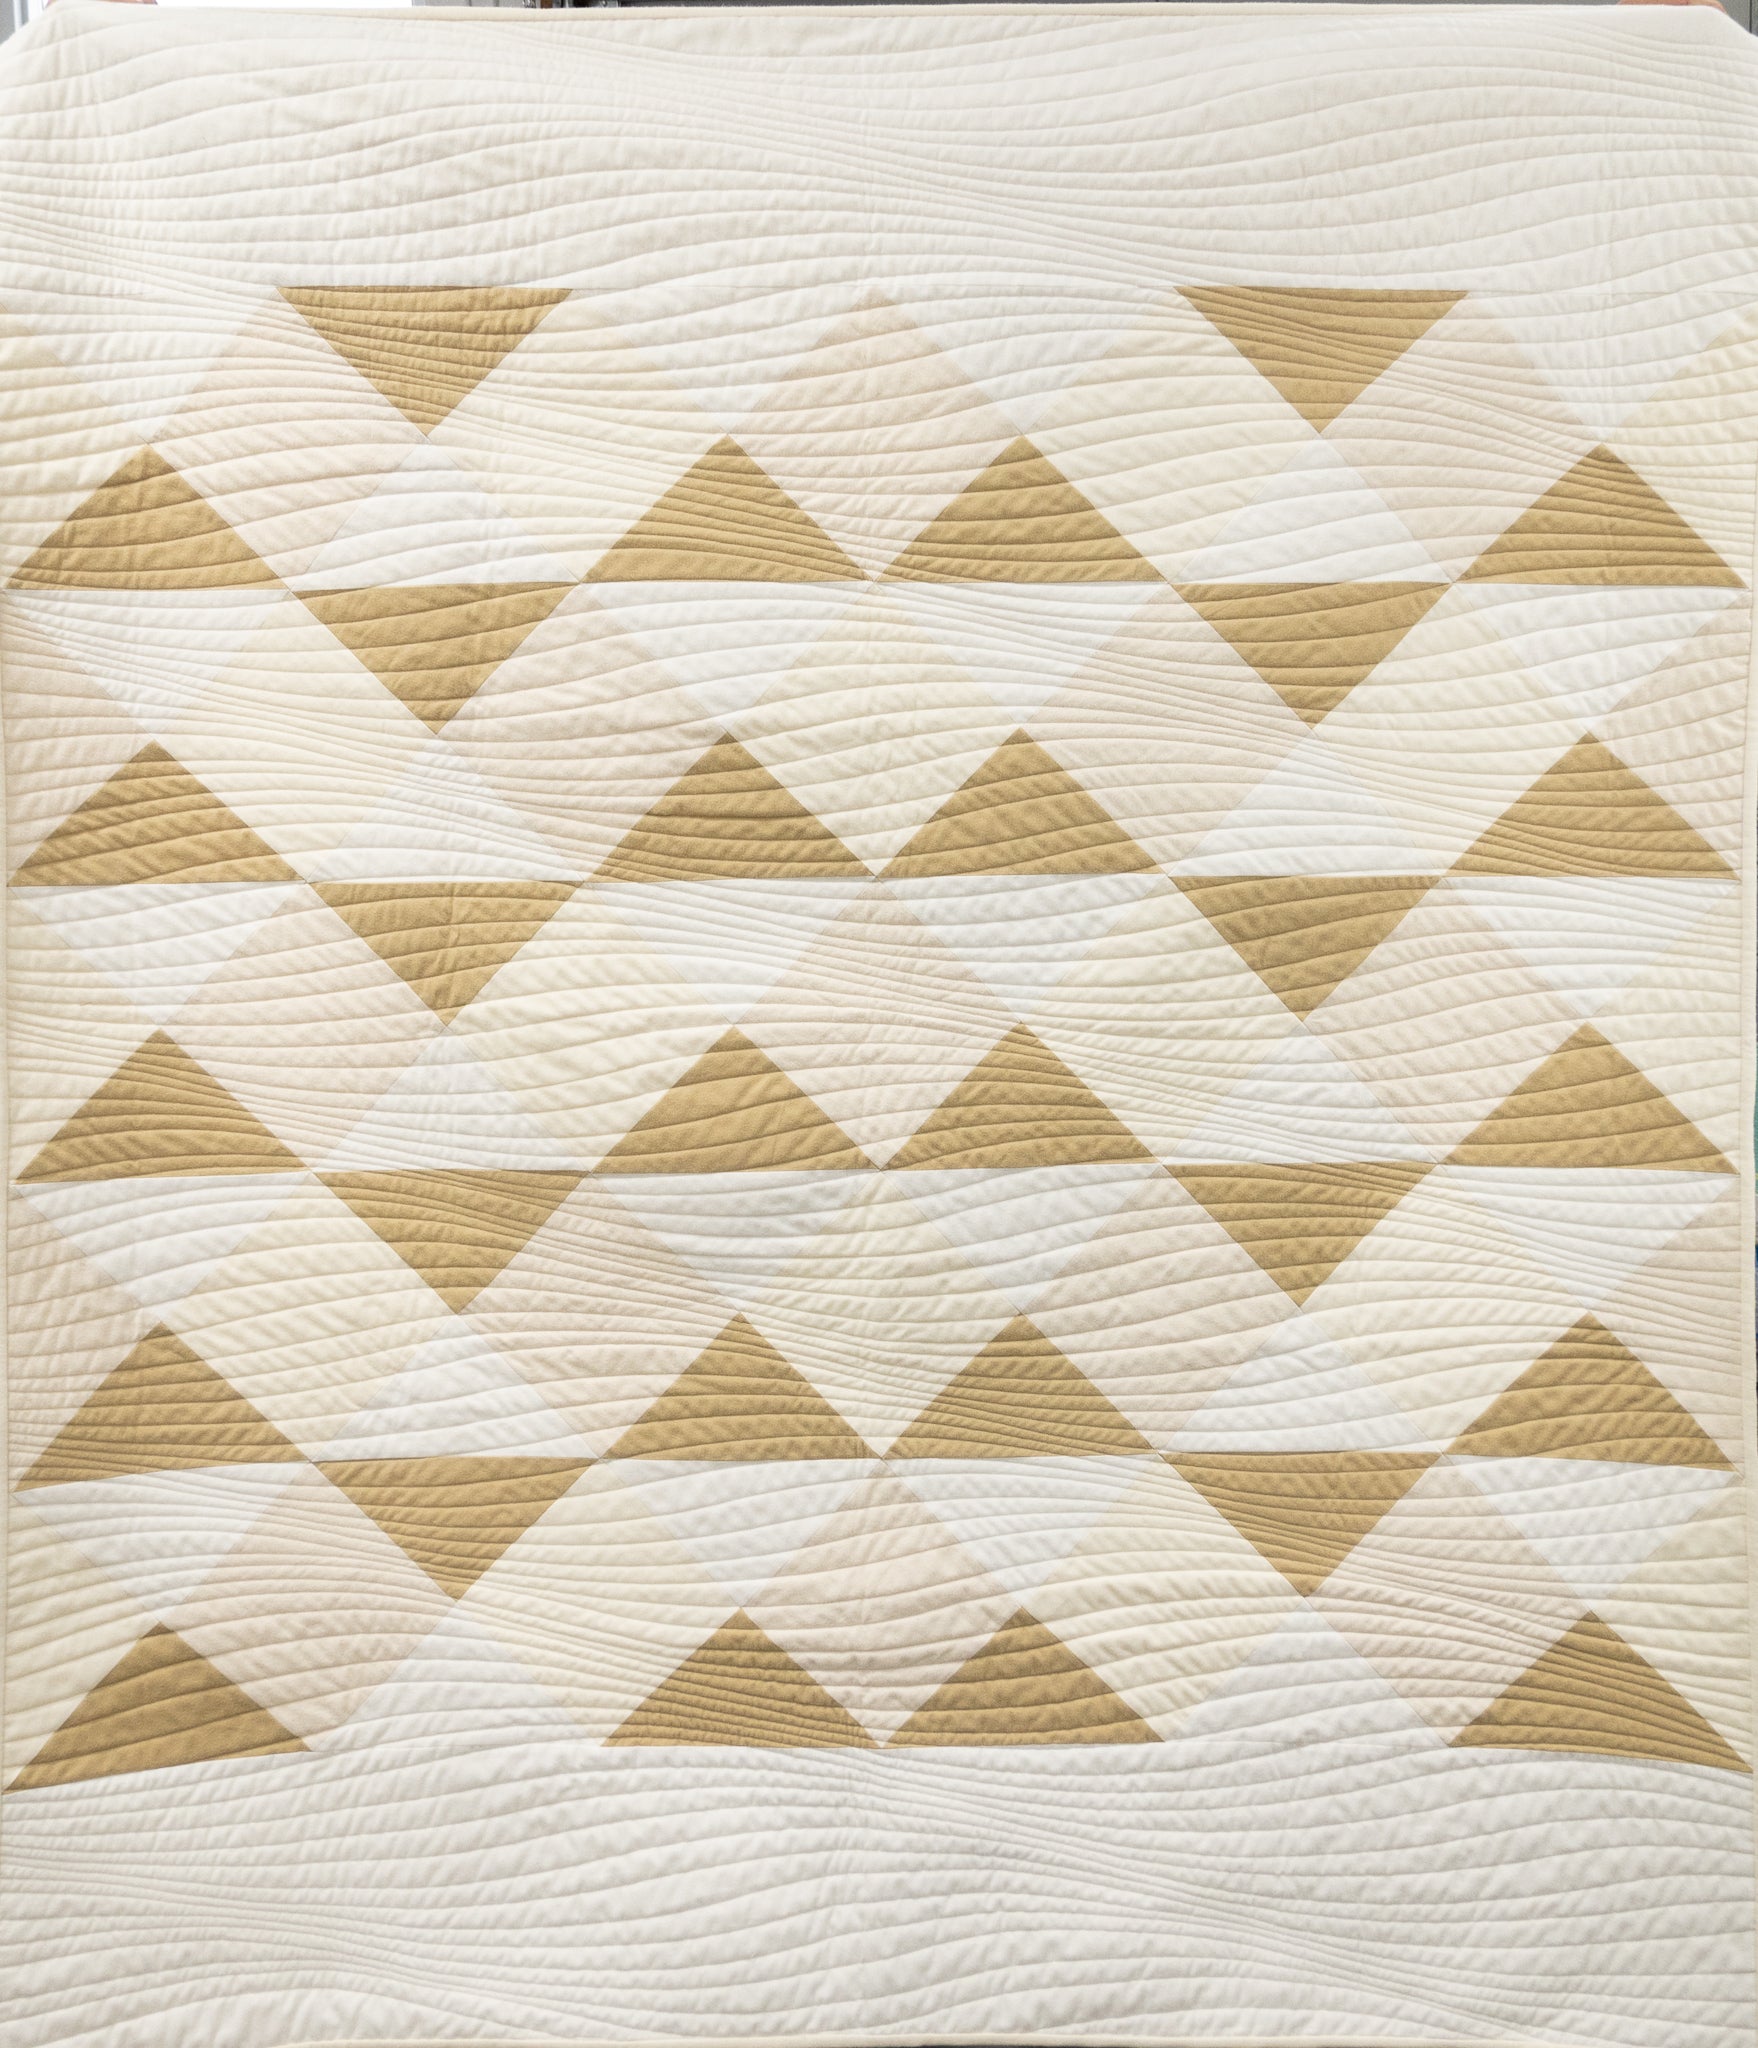 Sea Breeze quilt in flannel neutrals - Sewfinity.com